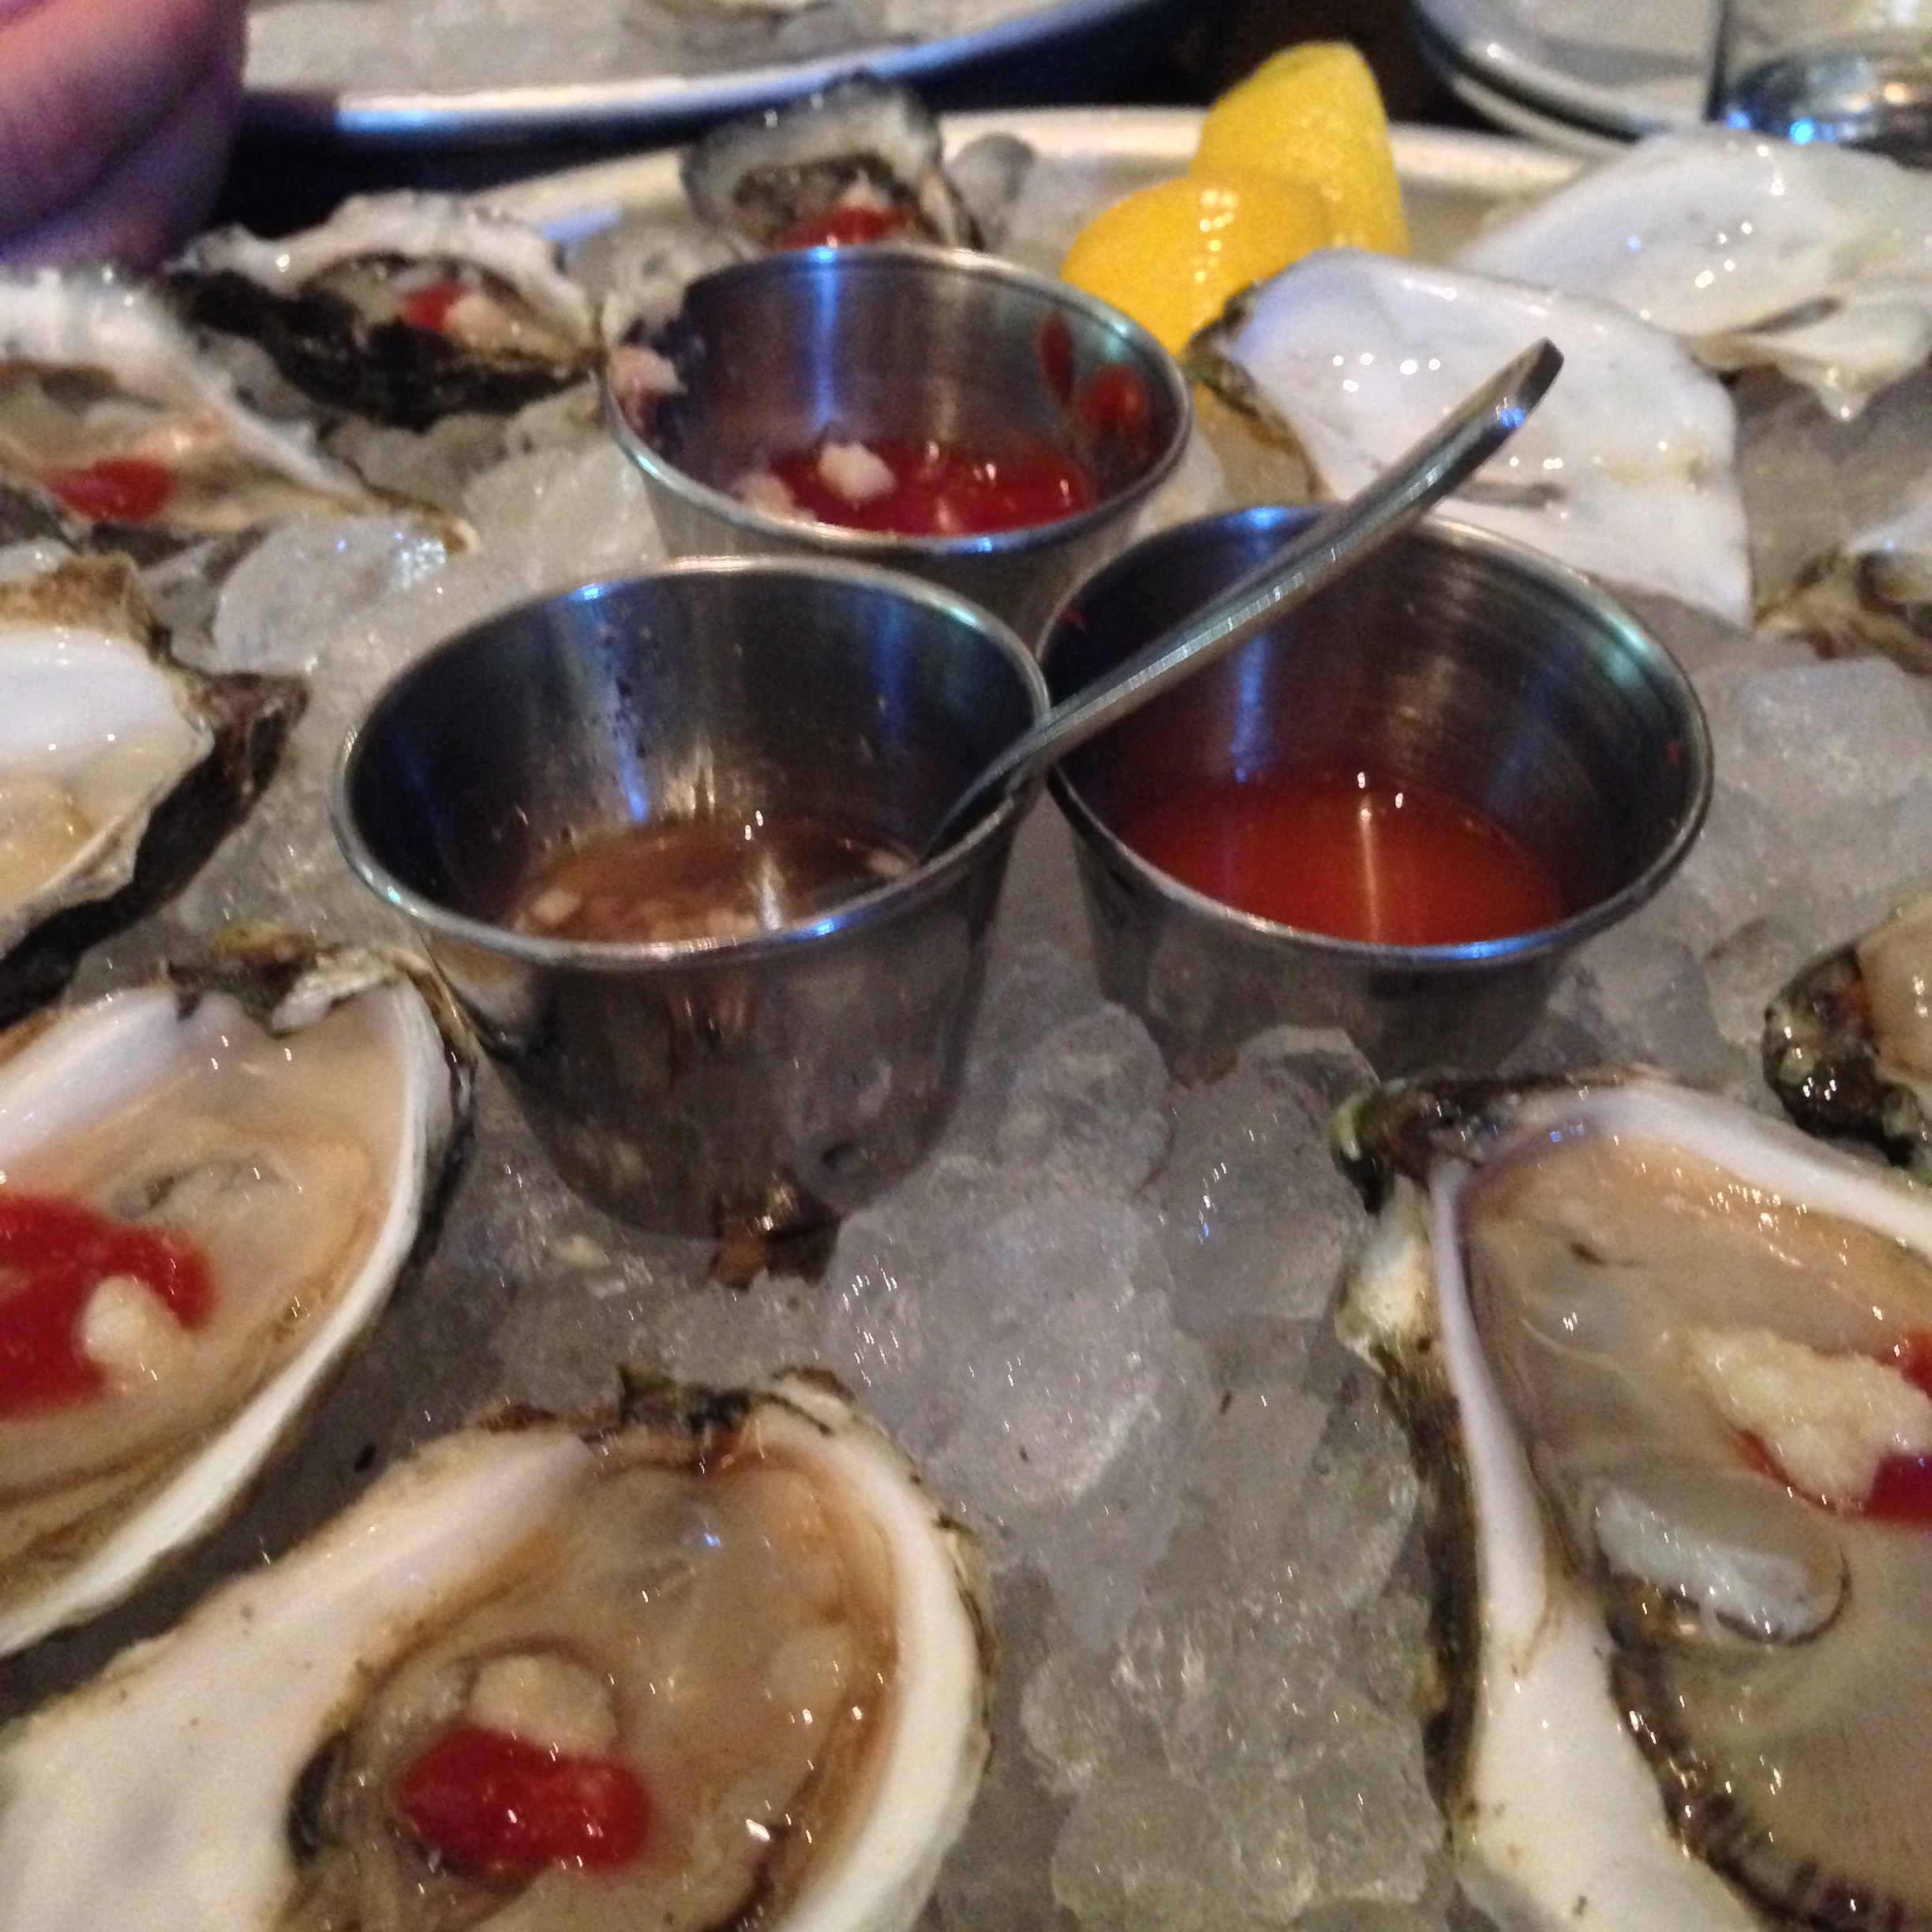 Oysters at Row 34